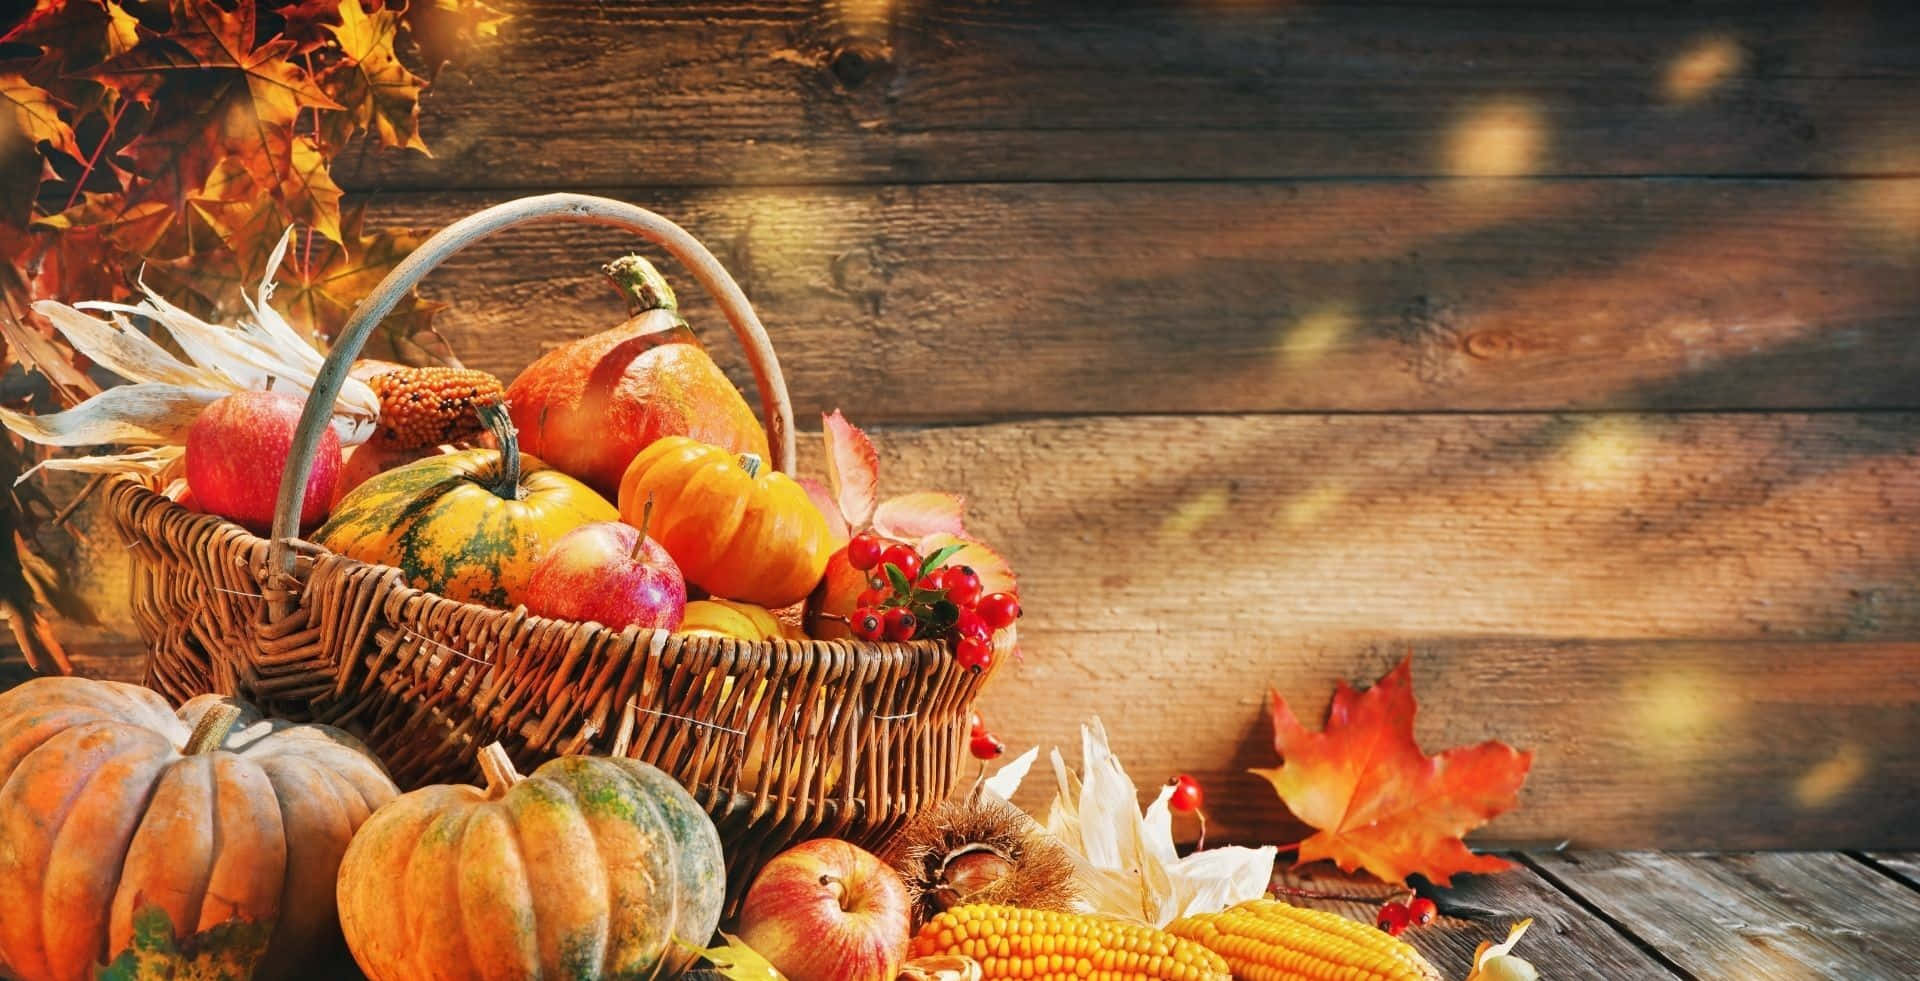 A Basket Of Pumpkins And Fall Leaves On A Wooden Table Wallpaper